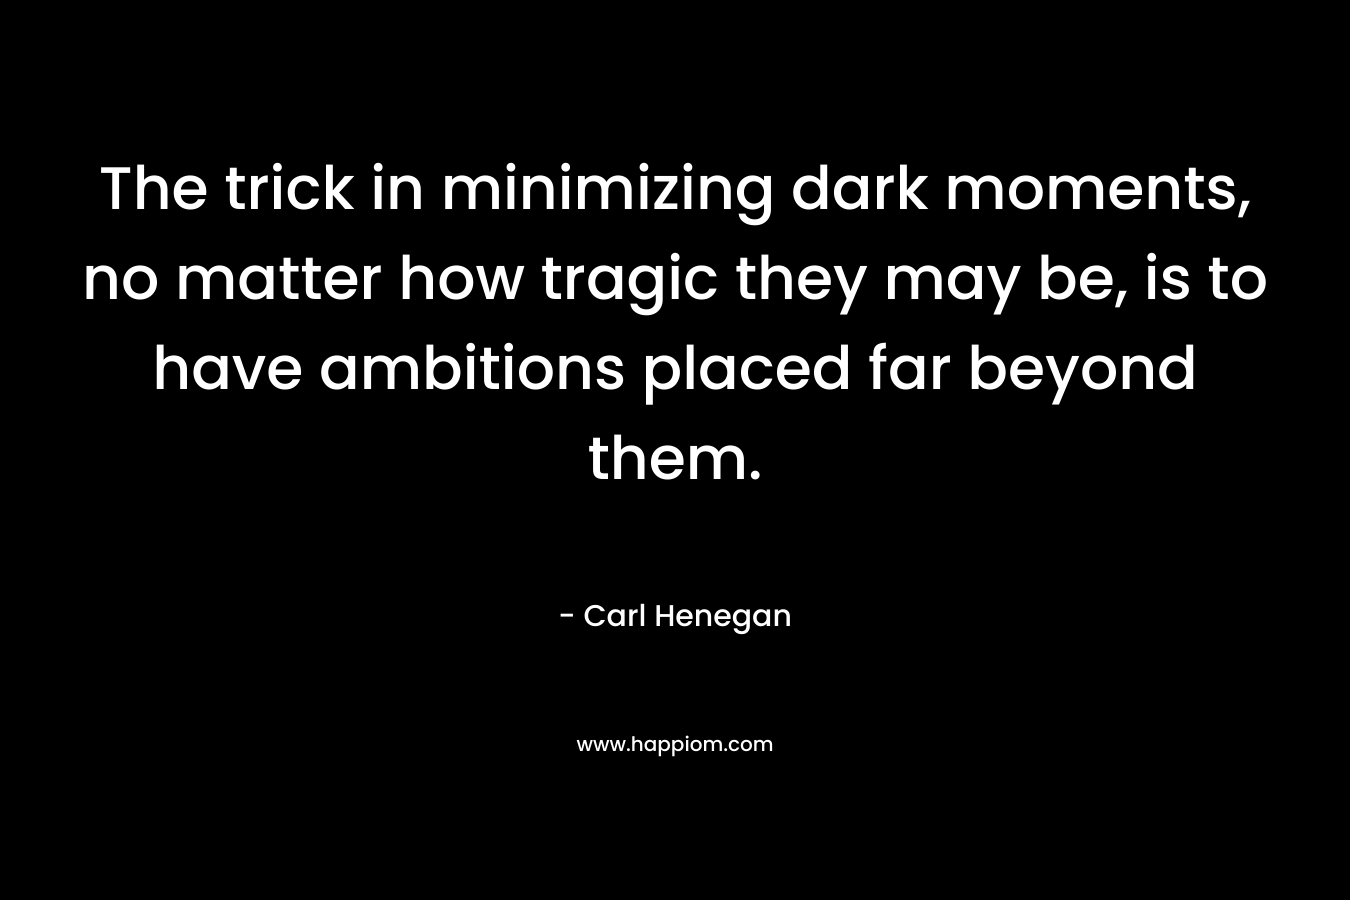 The trick in minimizing dark moments, no matter how tragic they may be, is to have ambitions placed far beyond them.